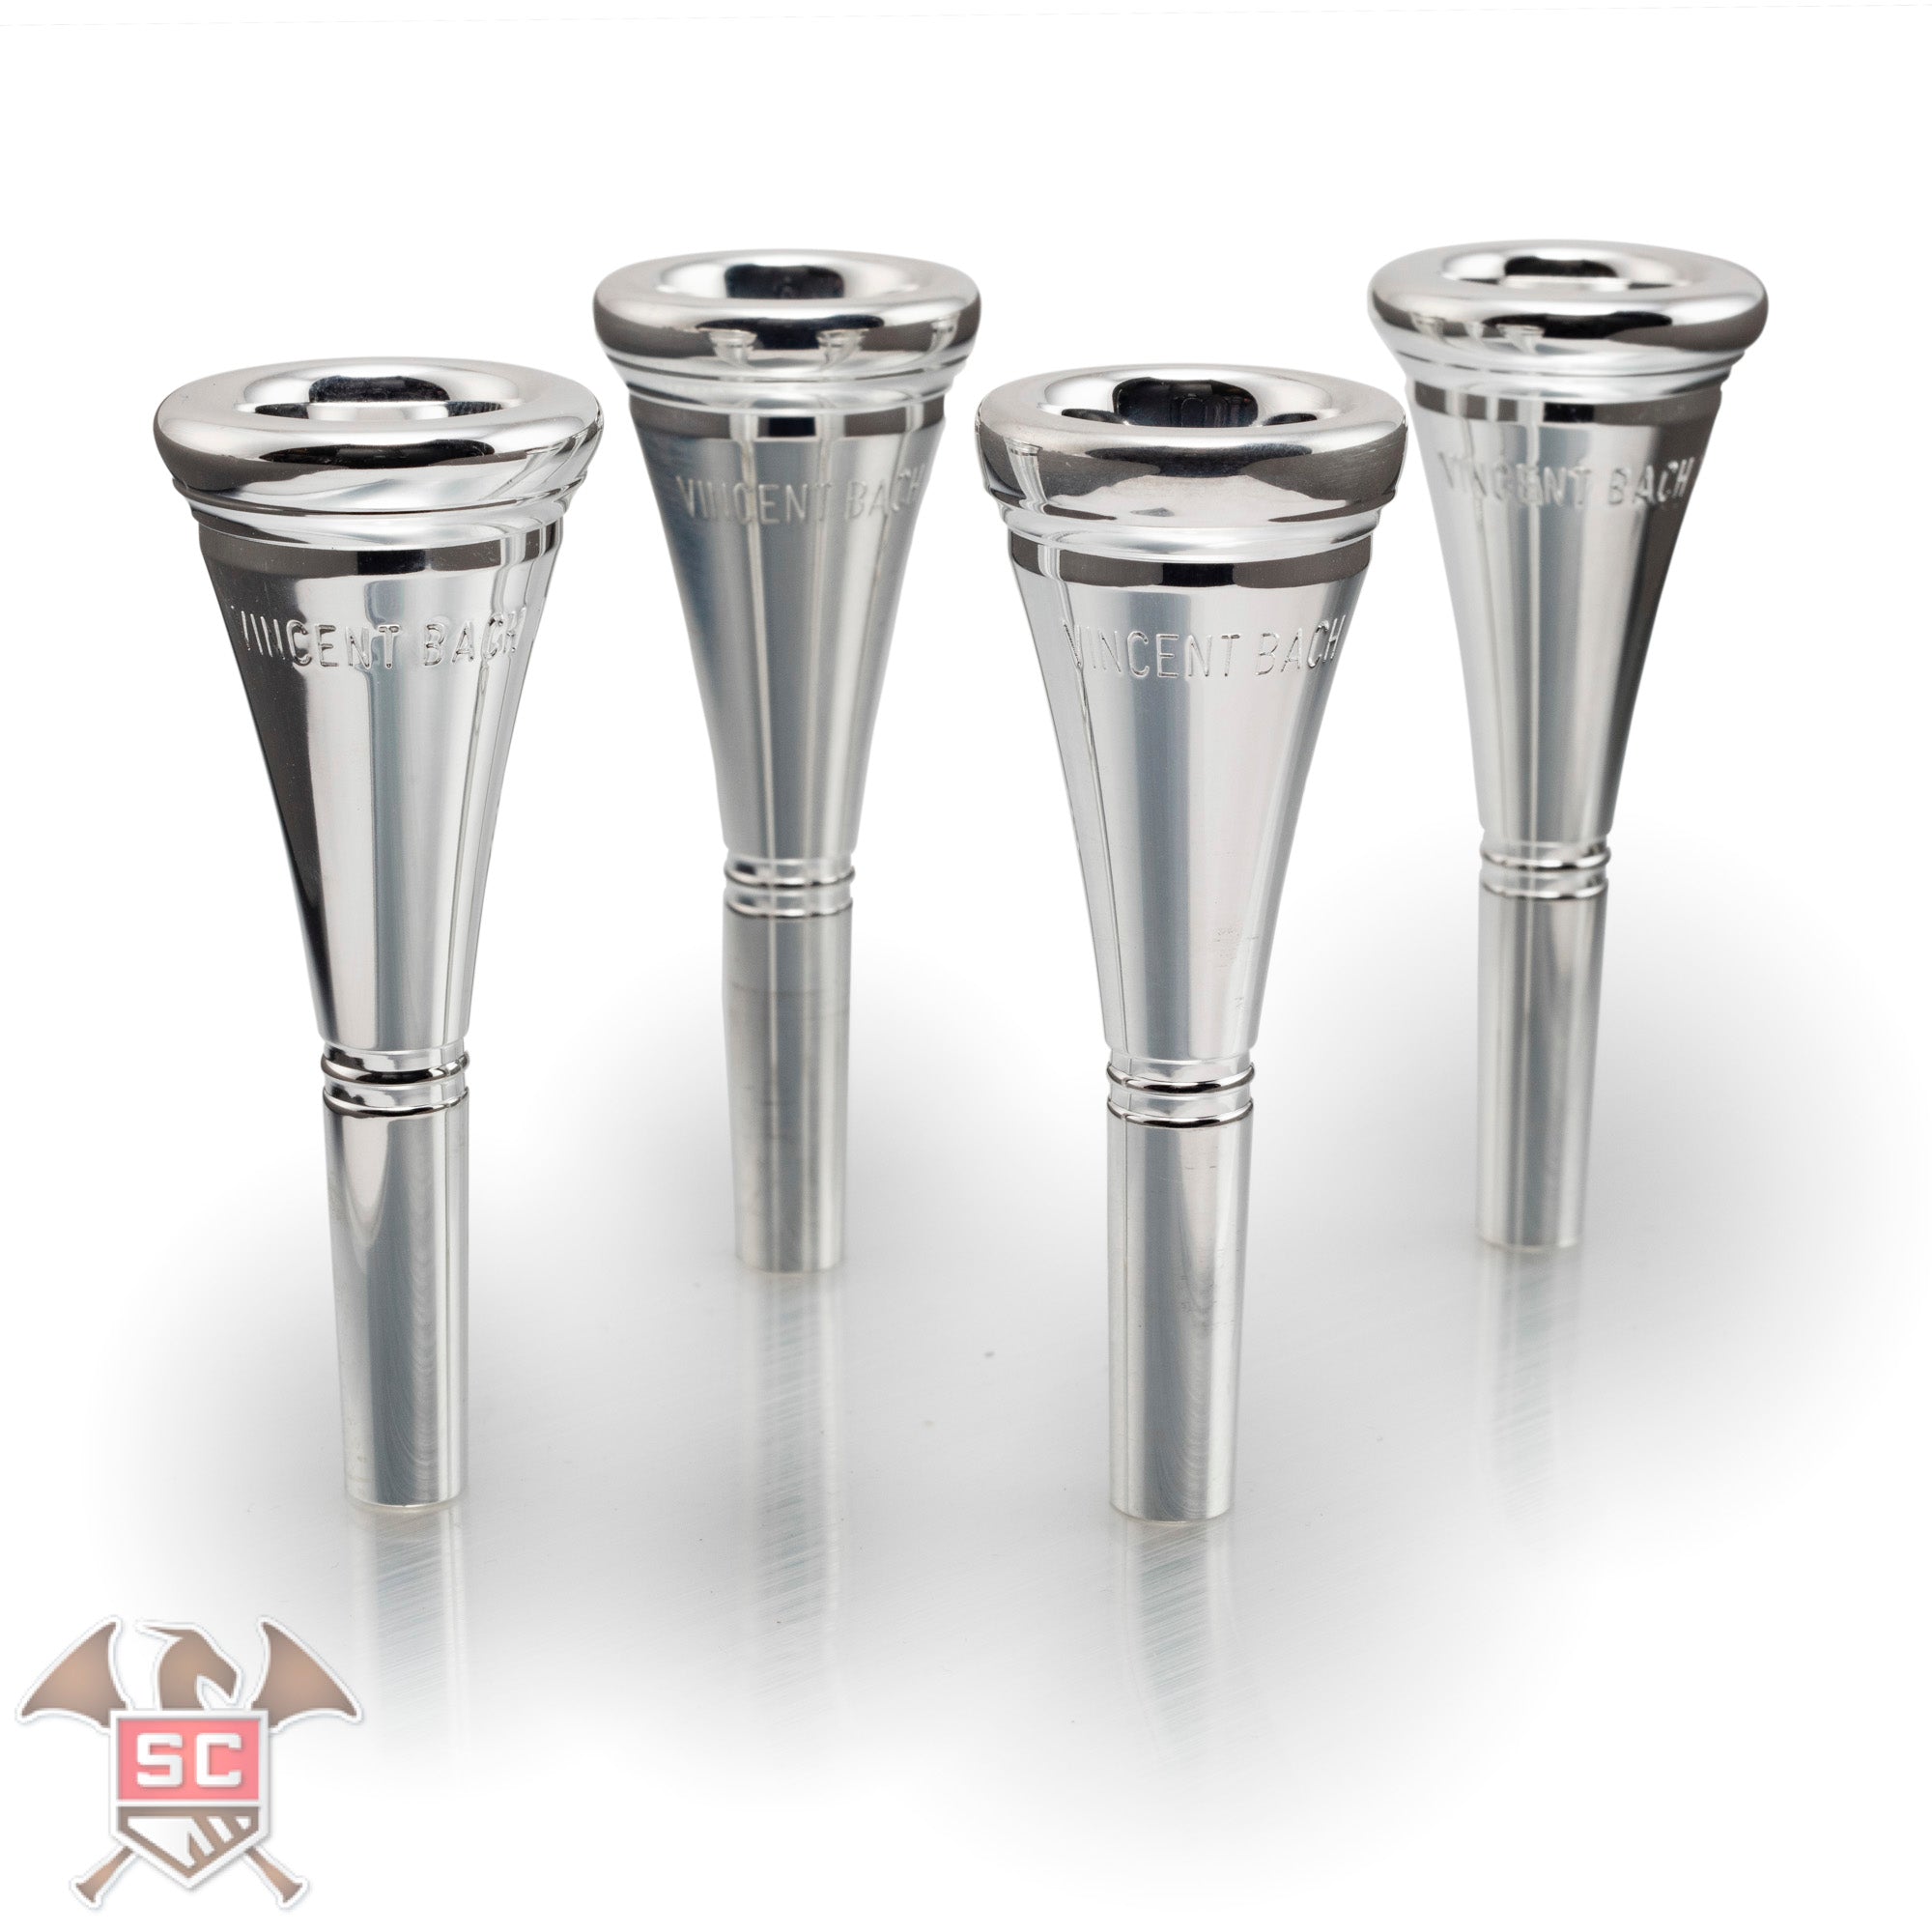 Vincent Bach Classic French Horn Mouthpieces - new models of trumpet mouthpieces